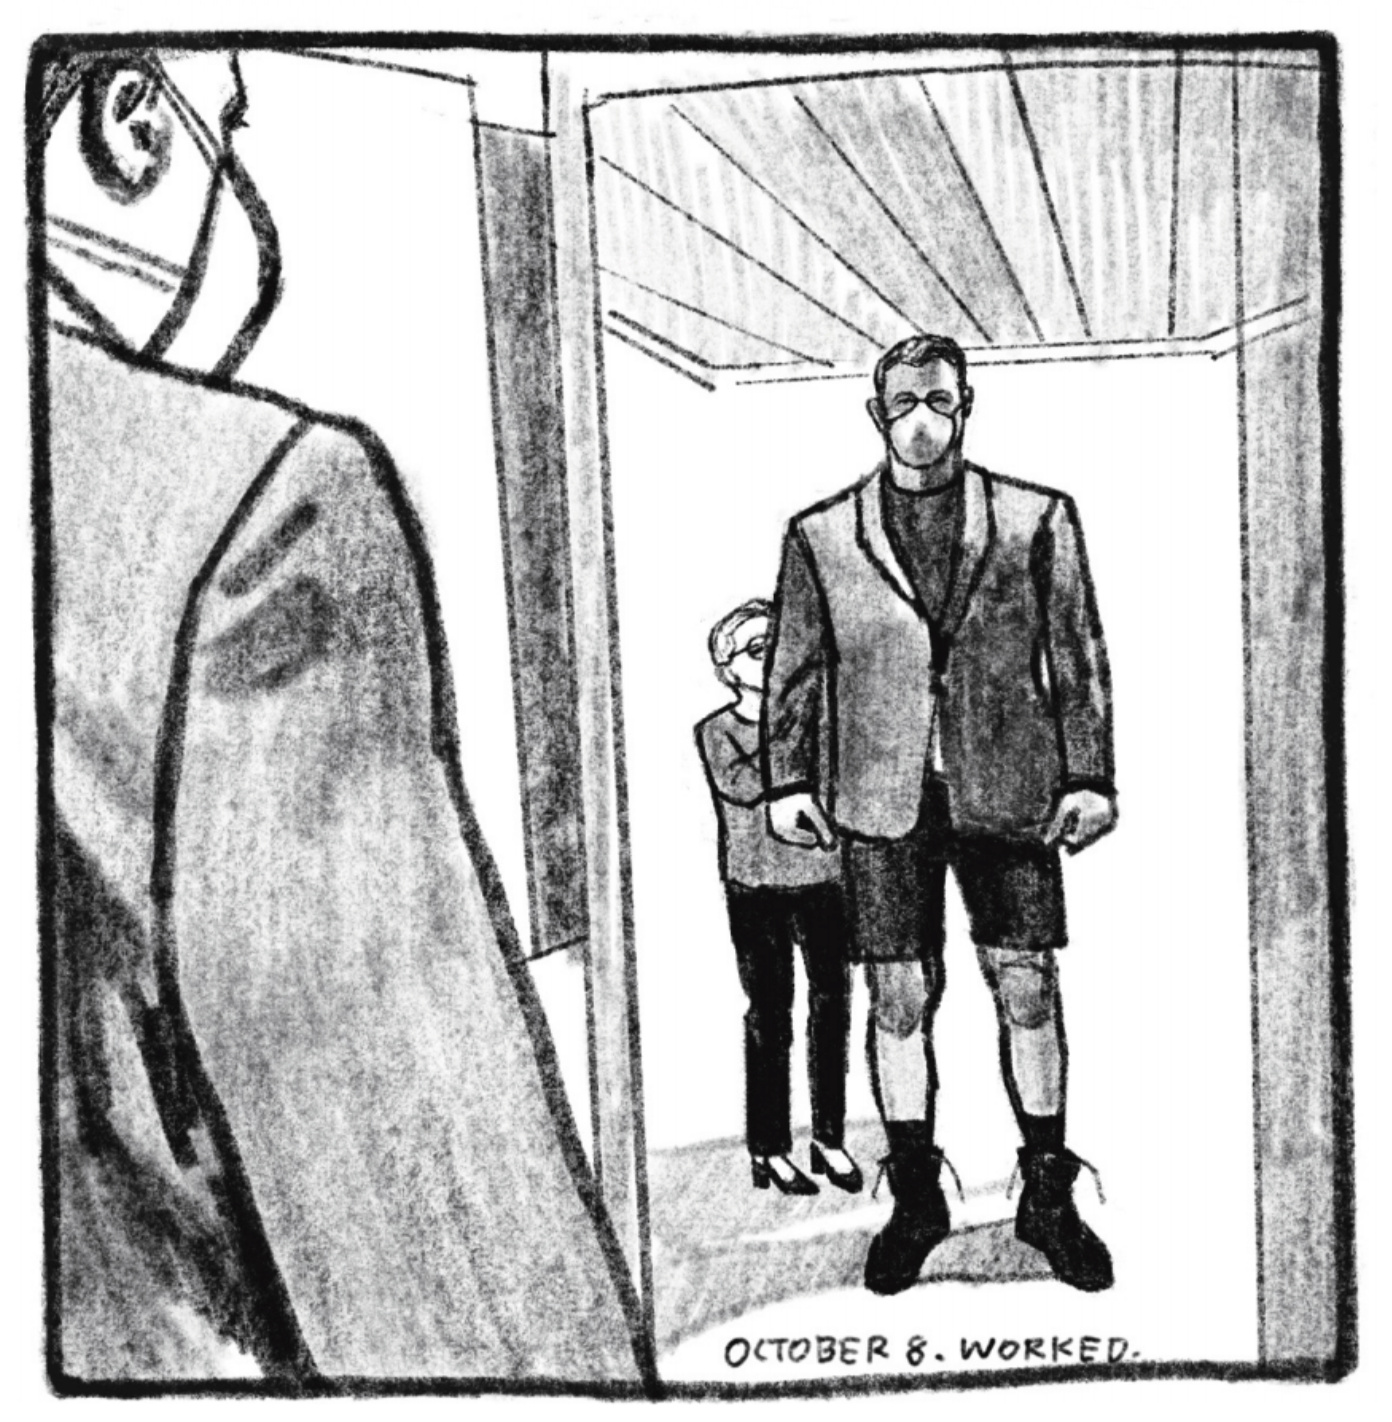 Tony is looking at his reflection in a full-body mirror. He looks to be getting fitted in a suit jacket. He is wearing a mask for covid, a suit jacket, shorts, and work boots. There is a woman standing behind him, who looks to be observing the jacket from behind. â€œOctober 8. Worked.â€ 